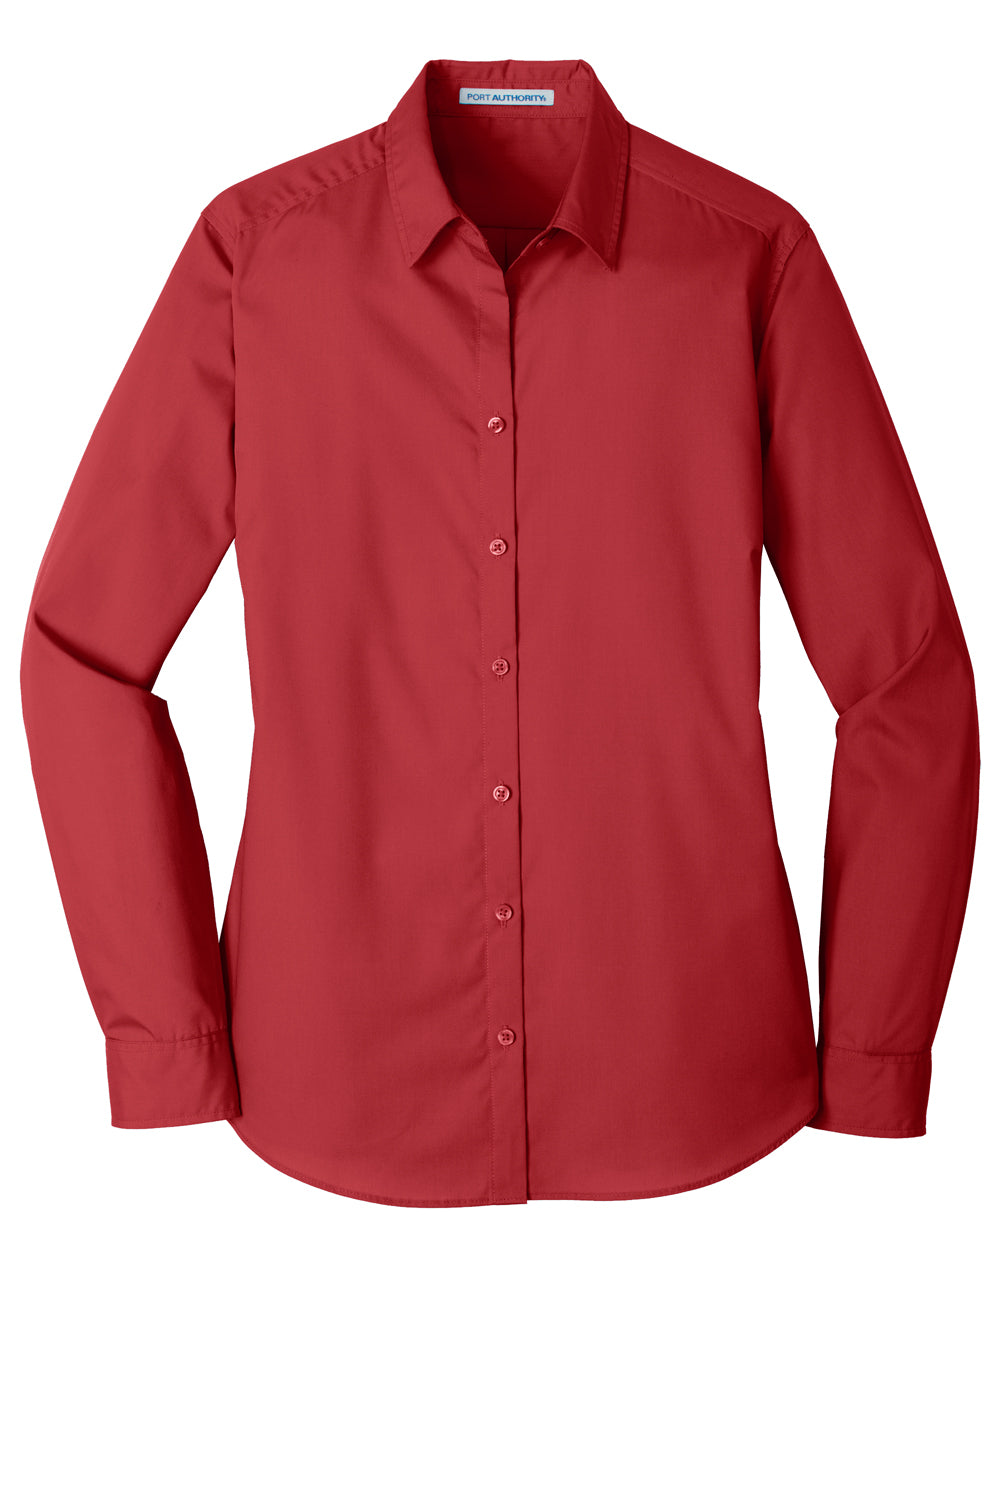 Port Authority LW100 Womens Carefree Stain Resistant Long Sleeve Button Down Shirt Rich Red Flat Front